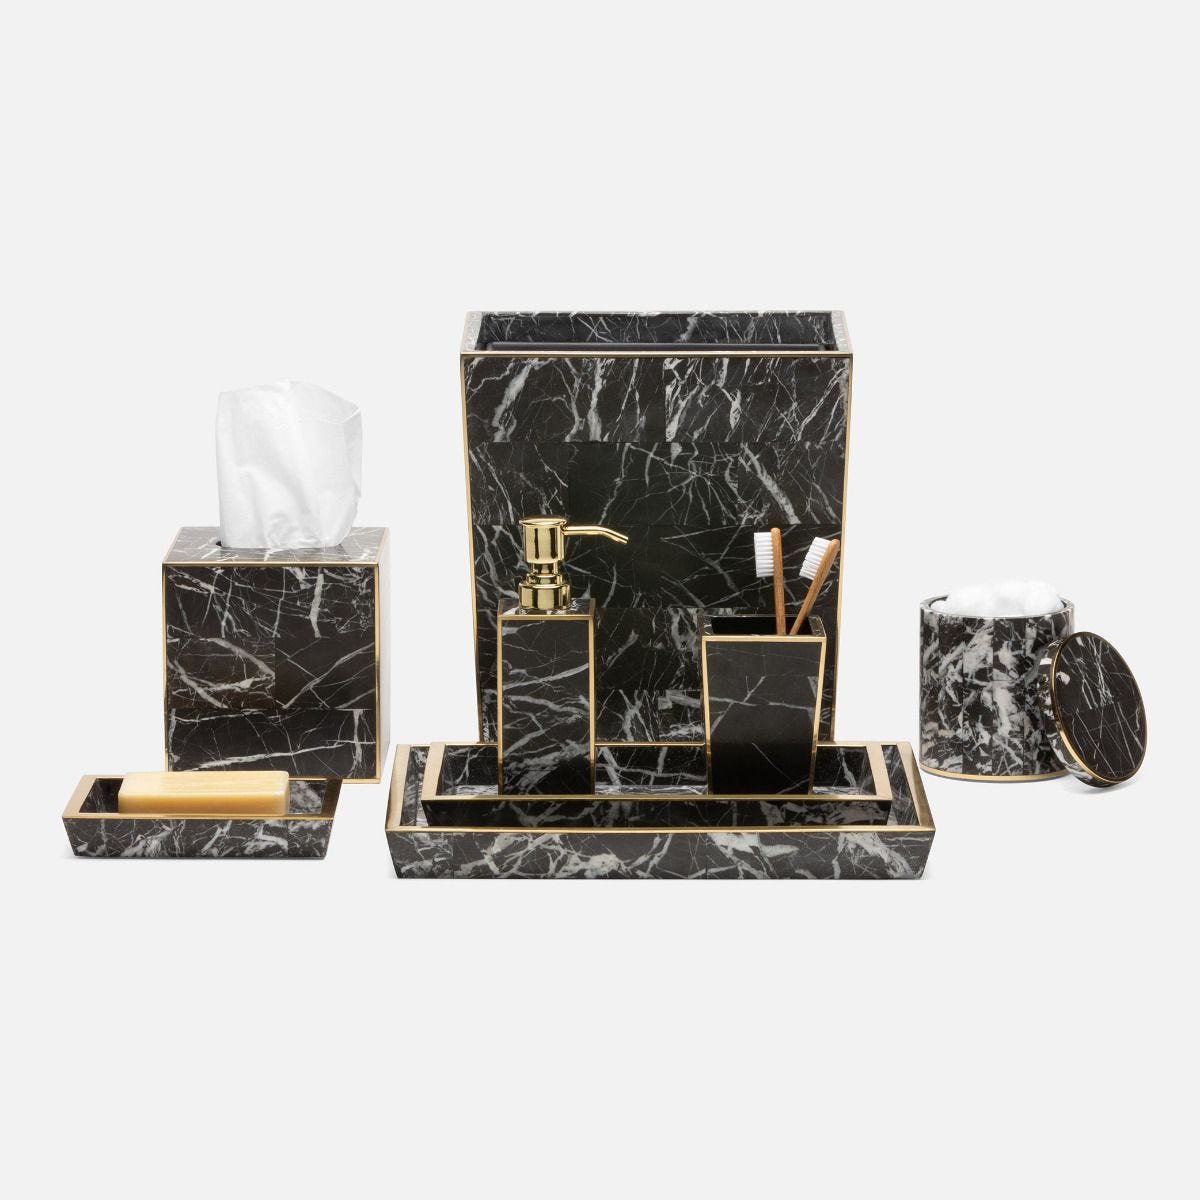 pigeon and poodle rhodes tissue box nero marble and brass styled